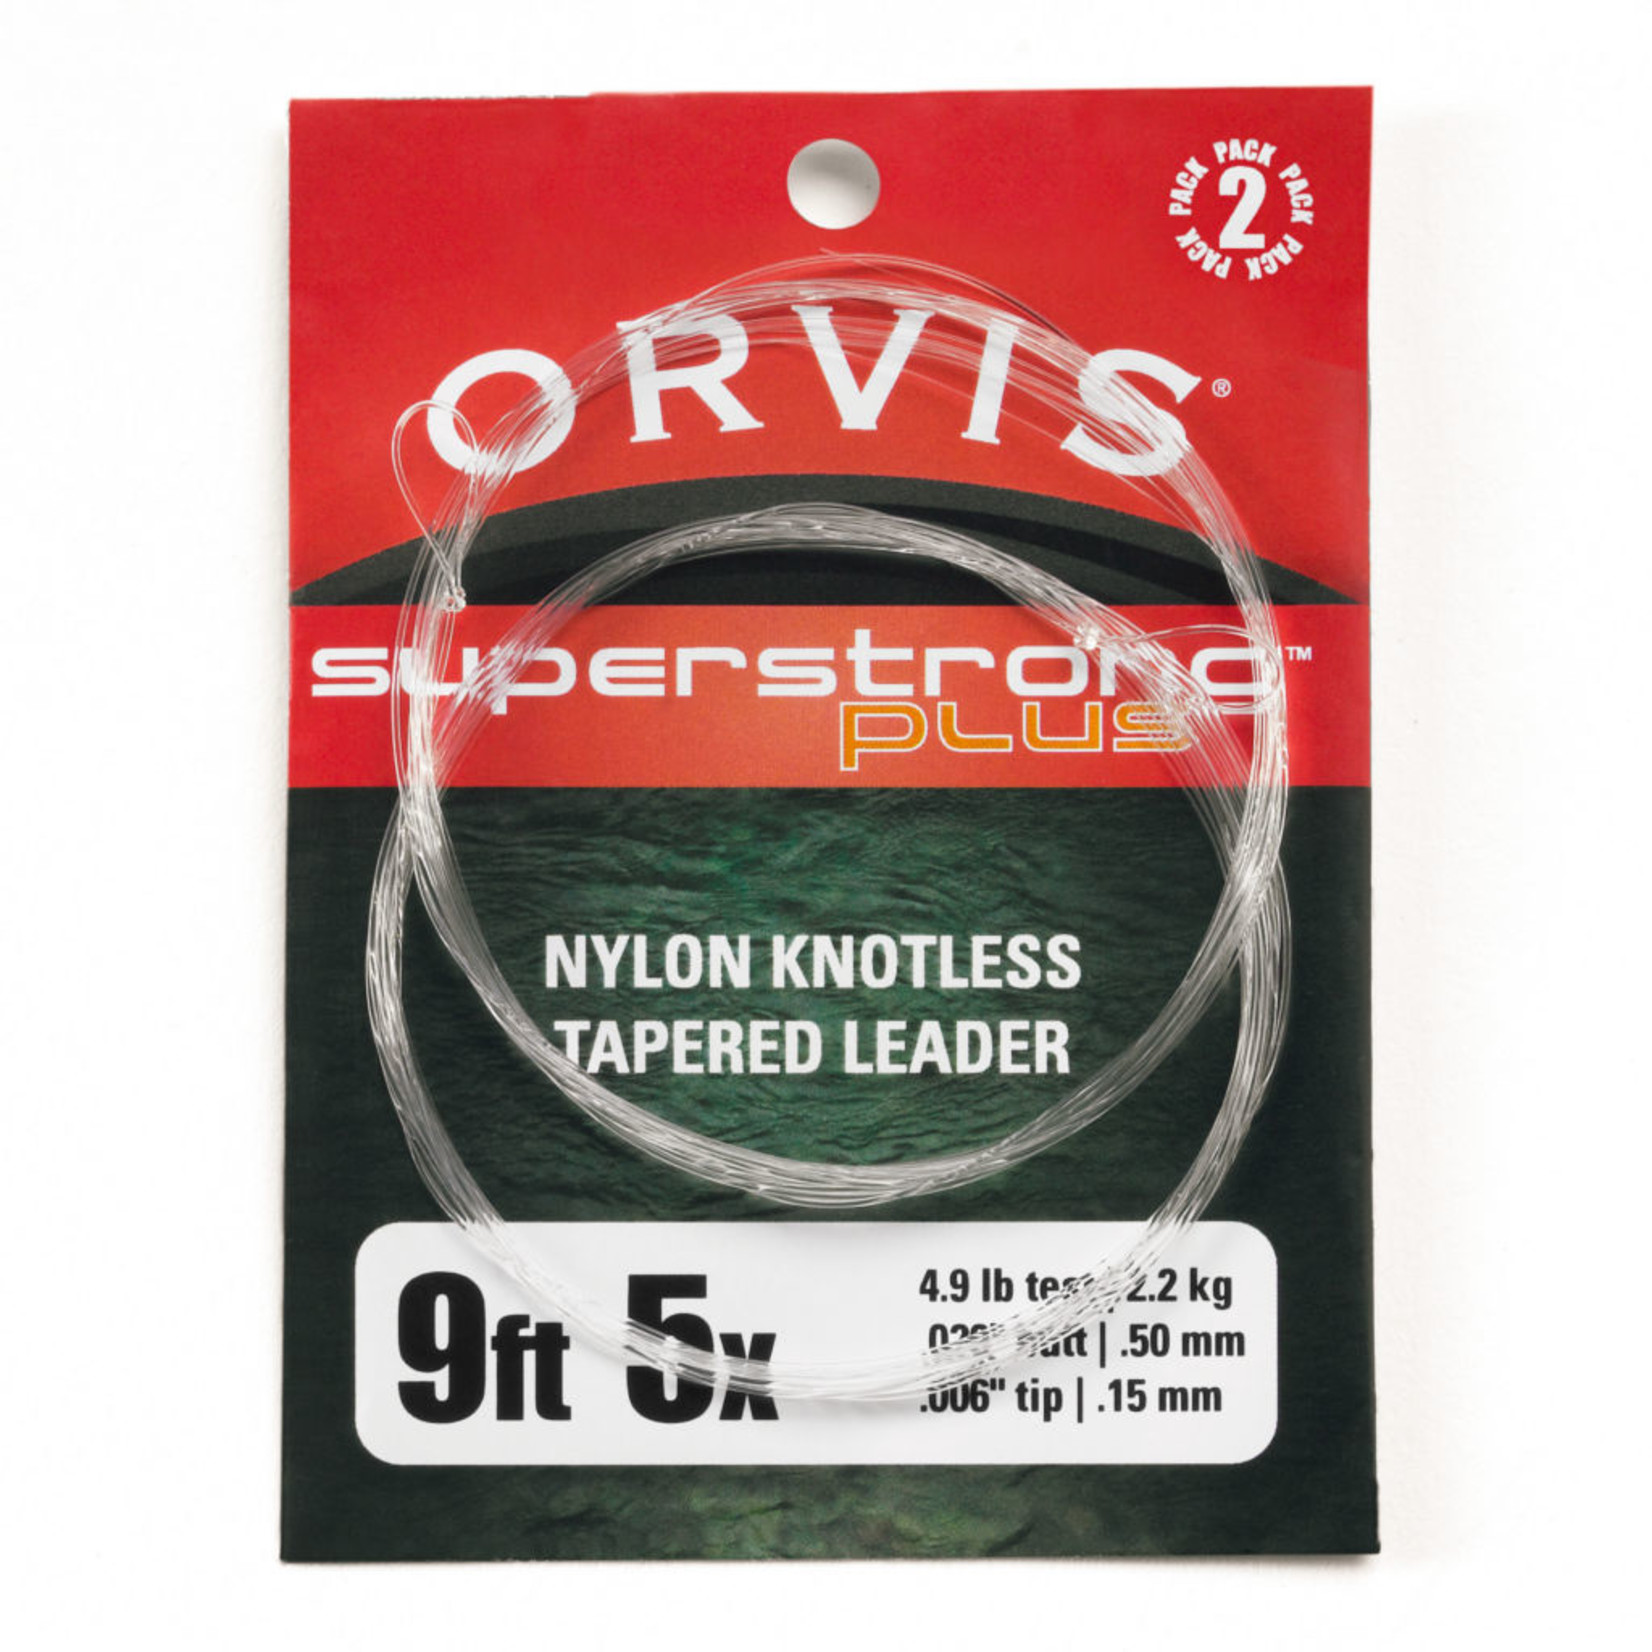 Orvis Supertstrong Plus Leaders